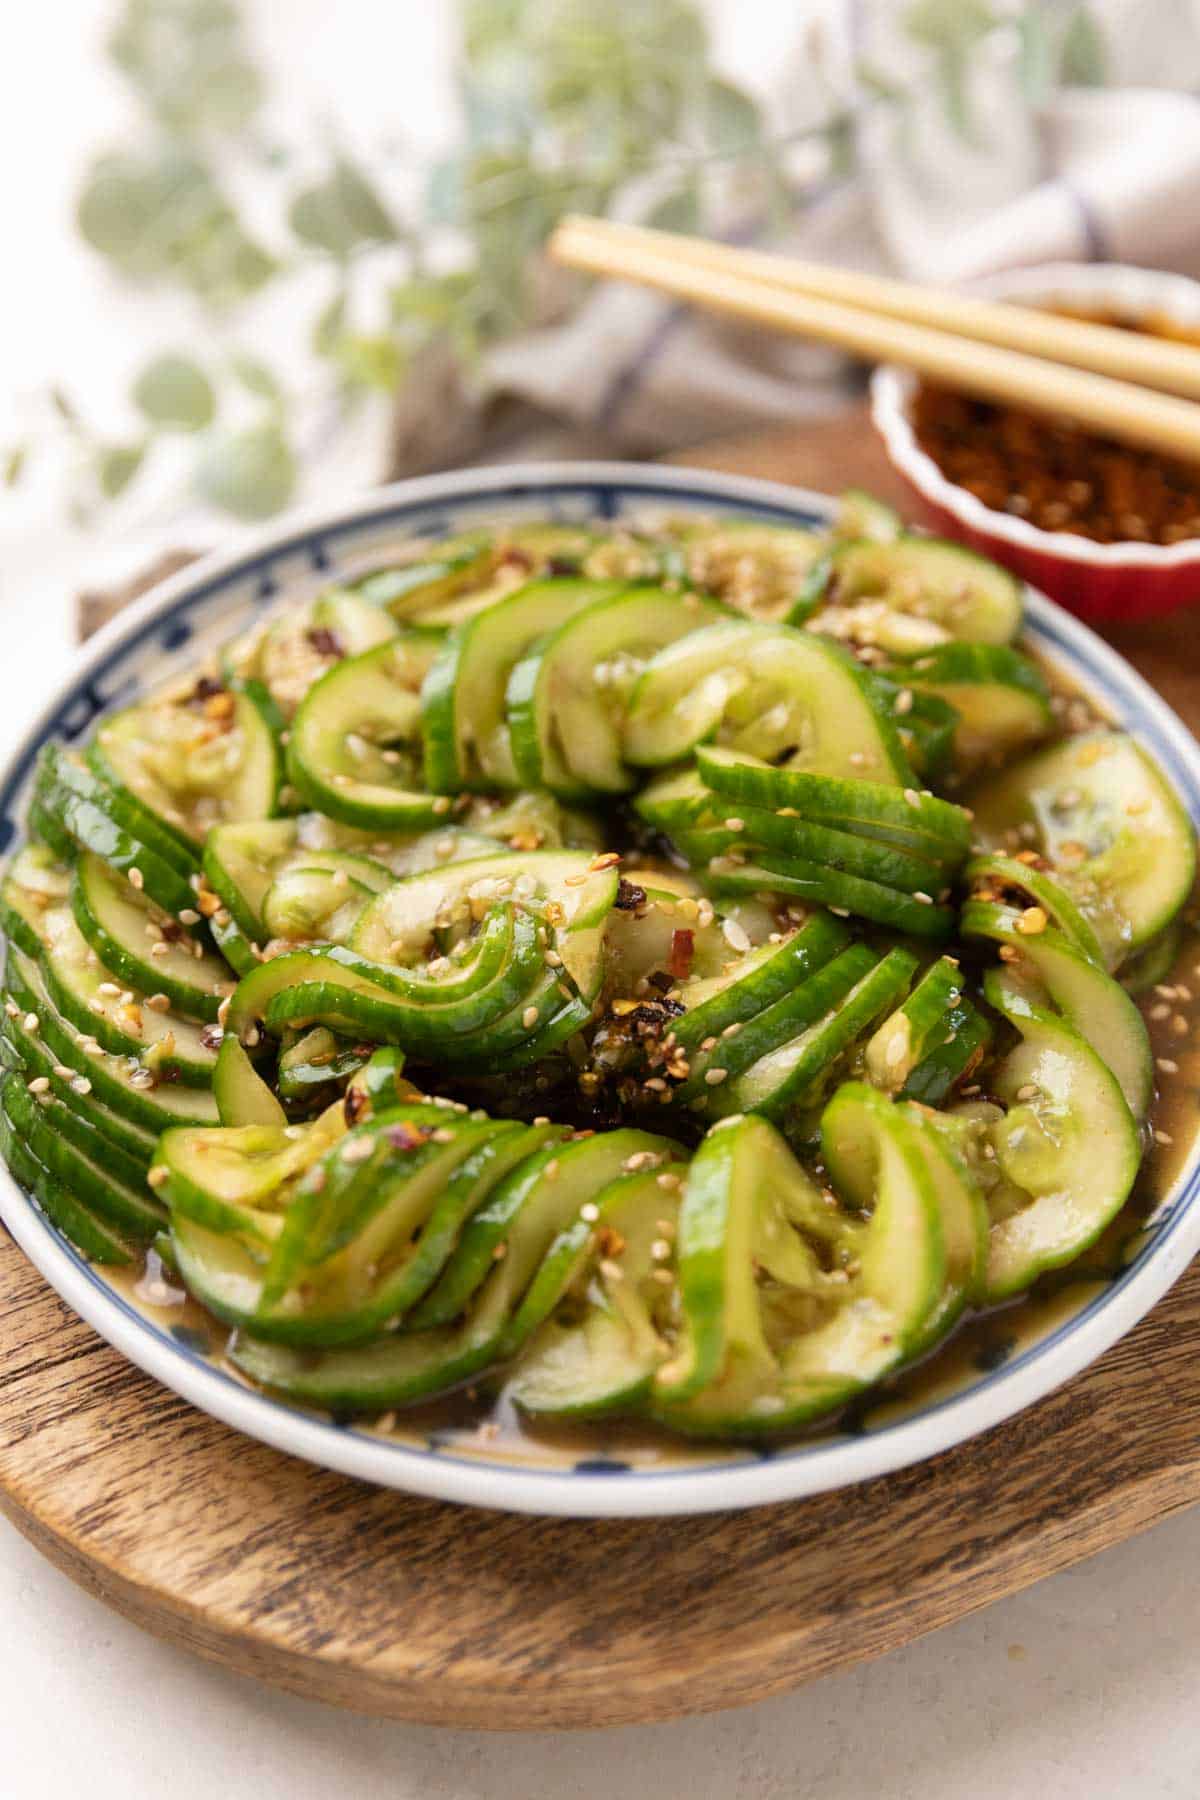 asian cucumber salad served in a blue and white plate placed on a brown board with a red bowl of salad dressing and chopsticks on the side